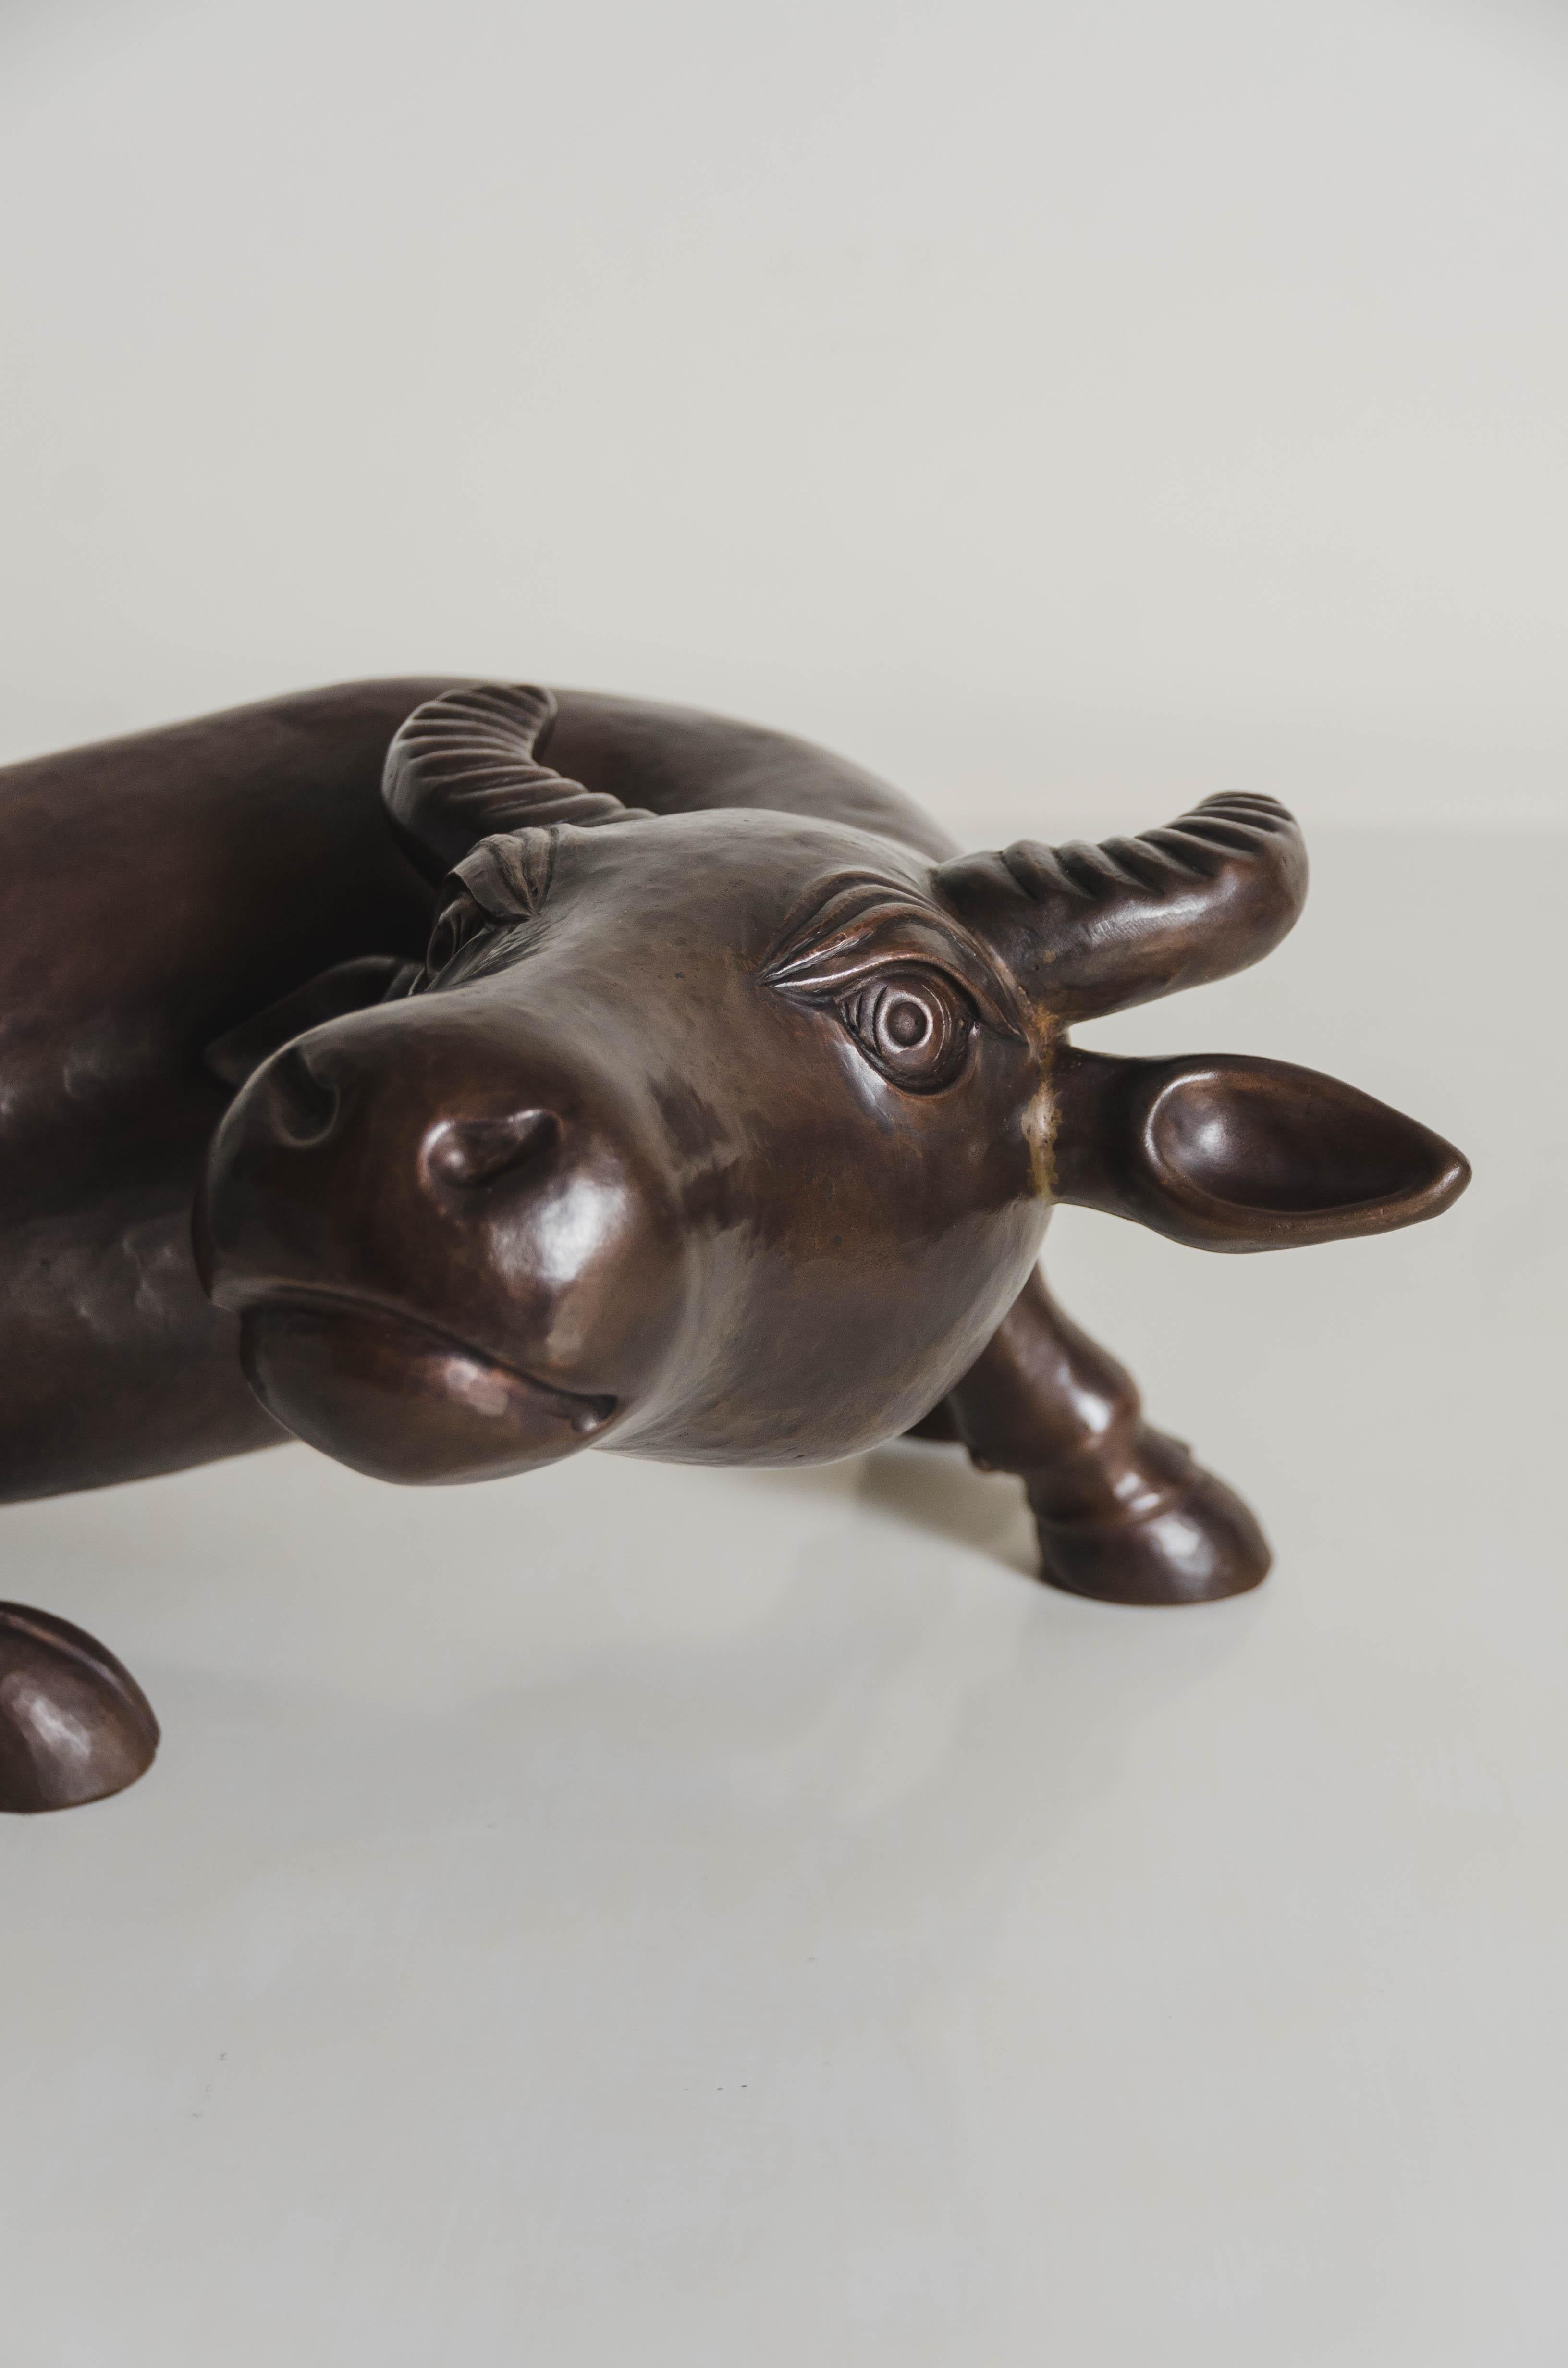 Contemporary Hand Repoussé Water Ox Sculpture in Antique Copper by Robert Kuo For Sale 4